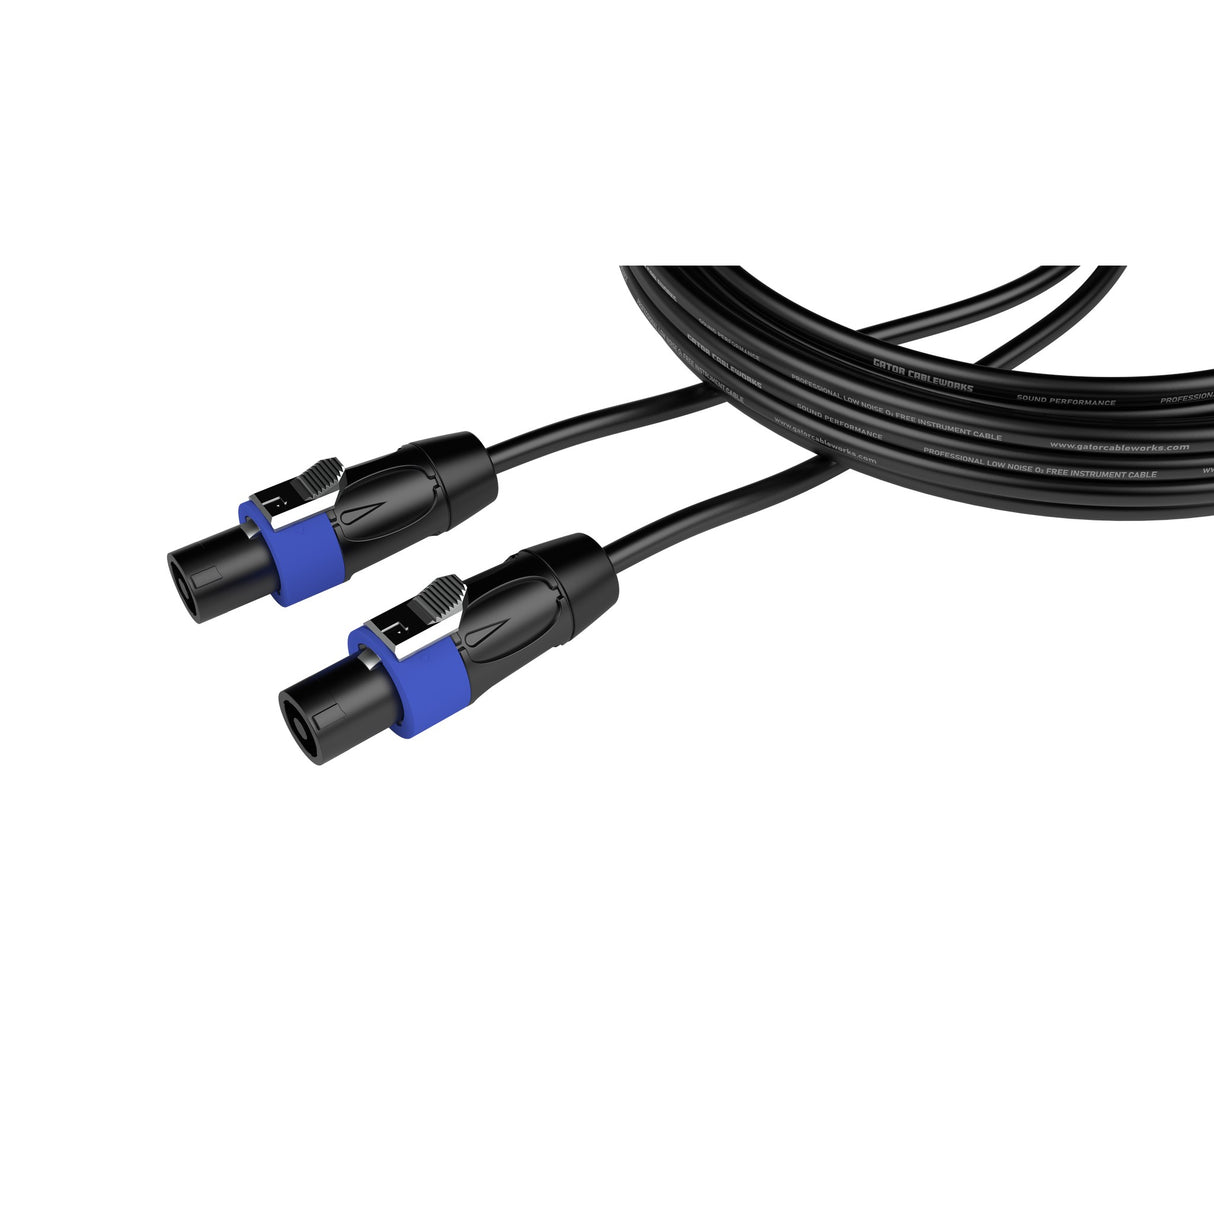 Gator CBW-CPSRSPKR2TWLK-CBLE-25 Composer Series Twist Lock Connector to Twist Lock Connector Speaker Cable, 25-Foot